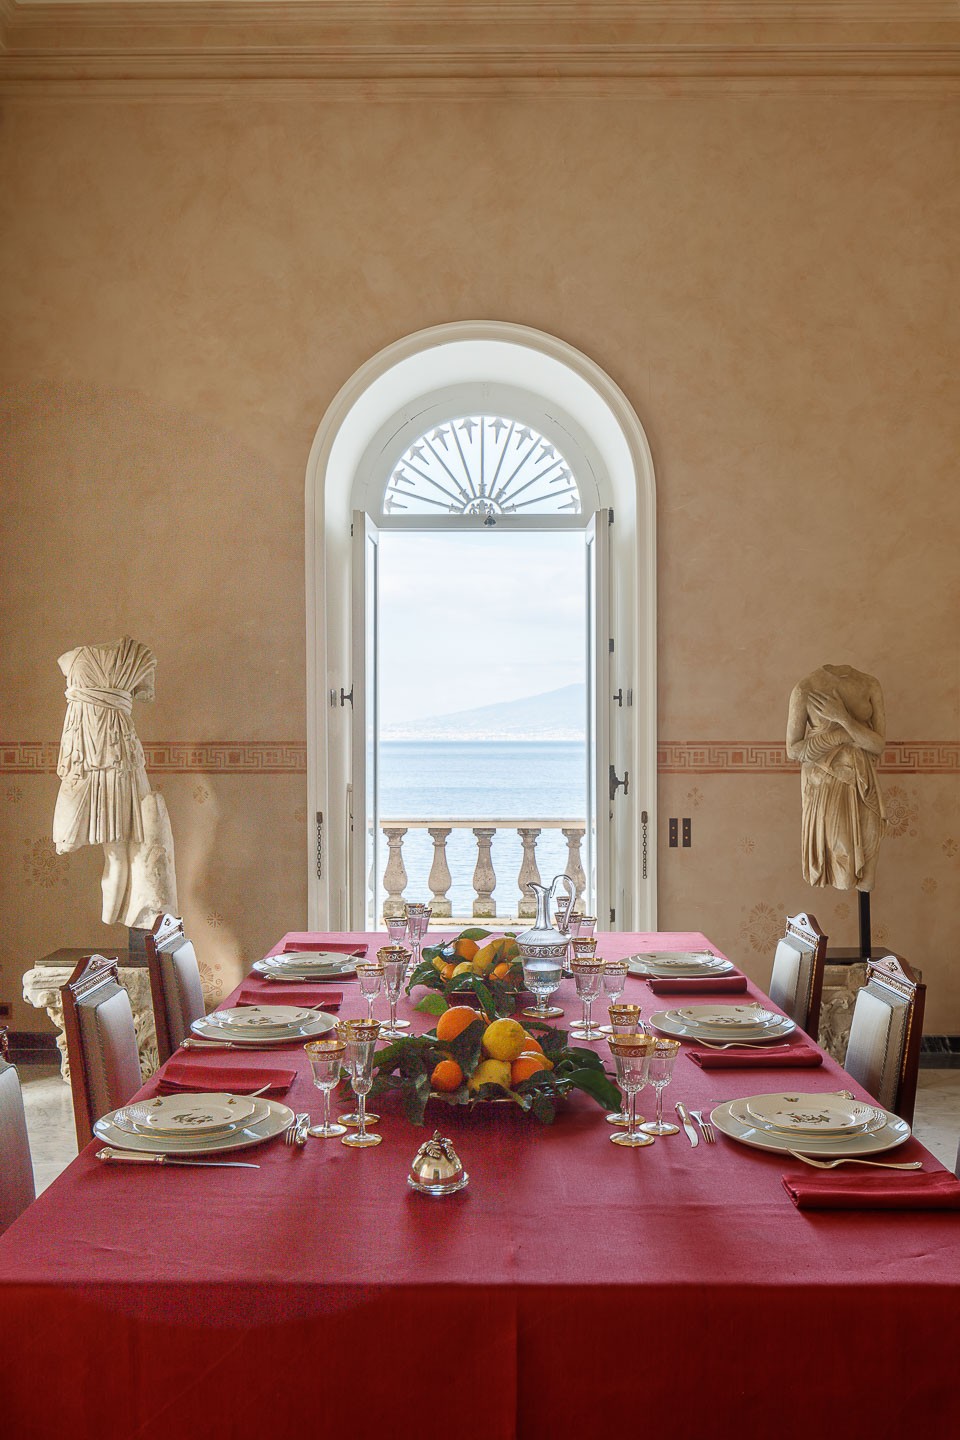 Villa Astor best exquisite dinning room marble table luxury linen glasses table setting decor decoration Italian fruit wine food breathtaking view The Heritage Collection